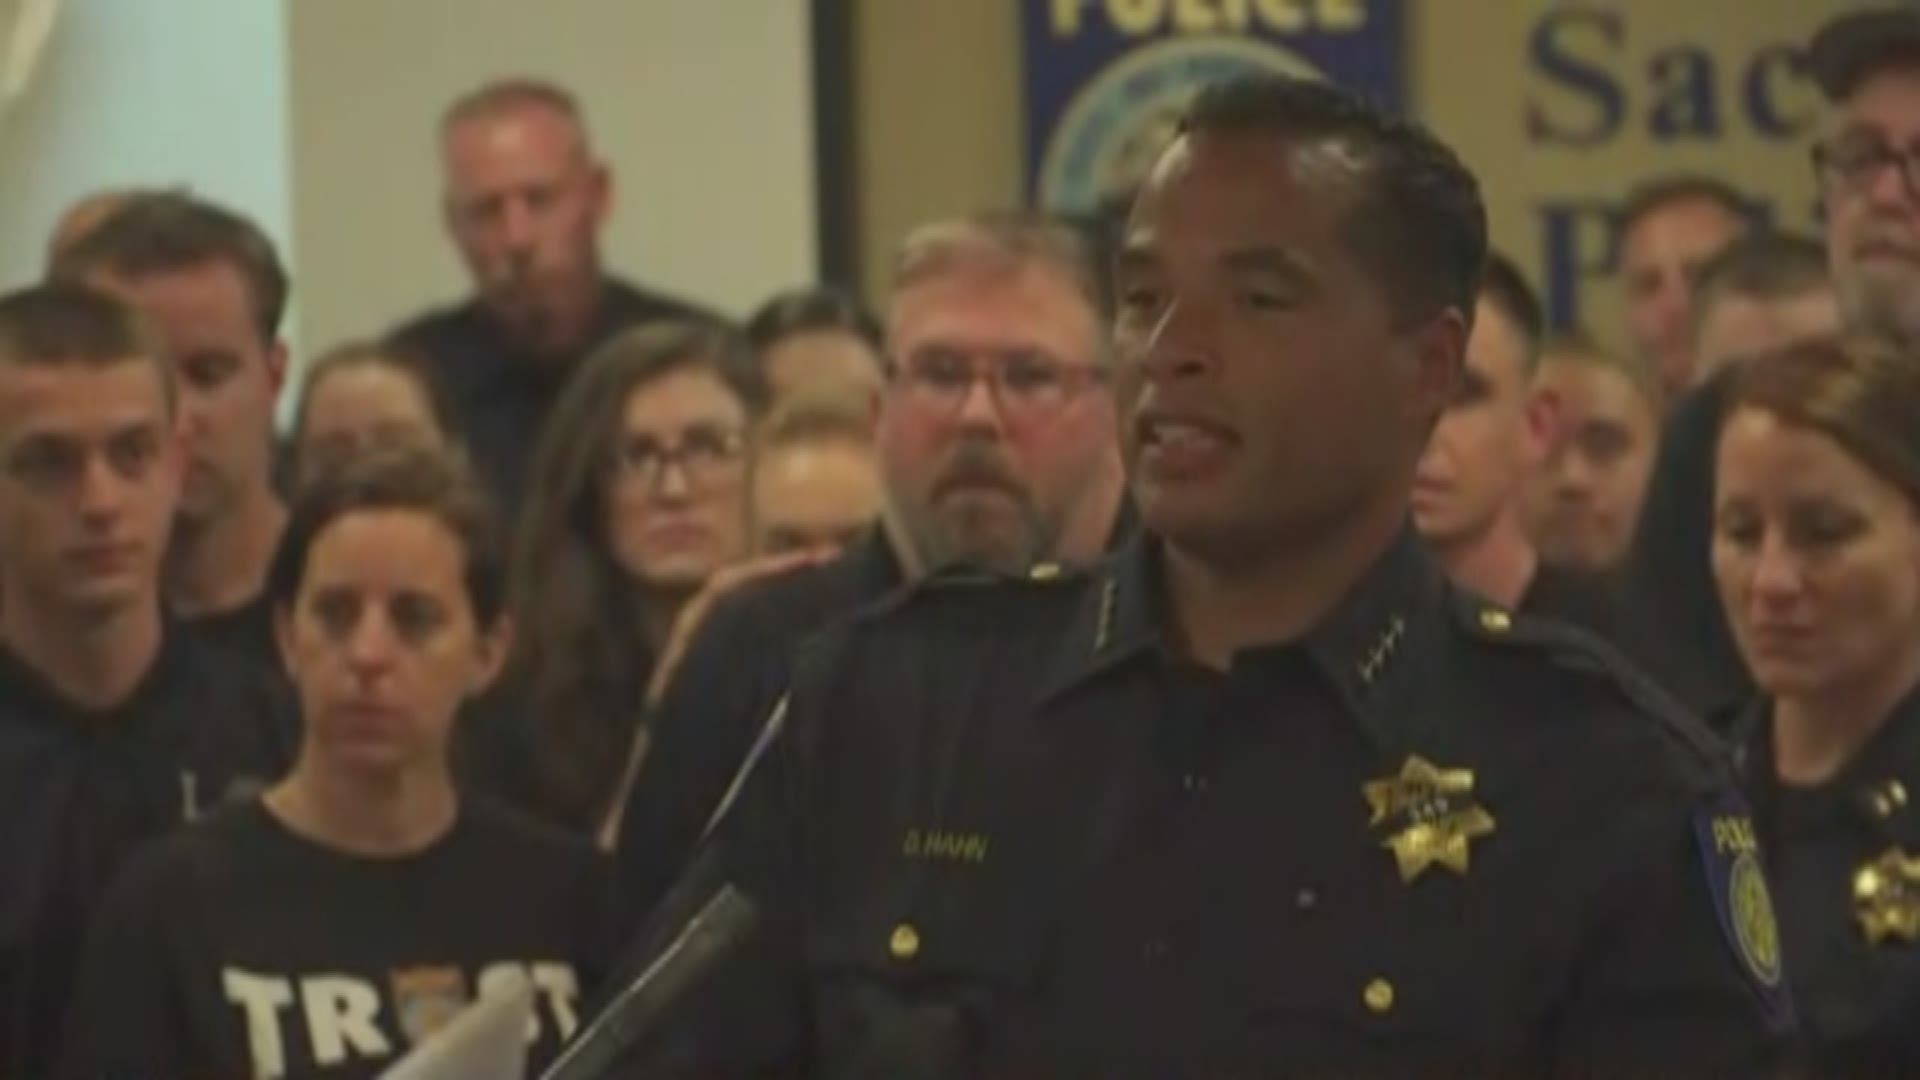 "Let's show them how much we love them back," Sacramento Police Chief Daniel Hahn said Tuesday, asking the community to show the family of fallen Officer Tara O'Sullivan support by coming to the memorial Thursday or "lining every inch of the memorial procession" as a thank you for their sacrifice.